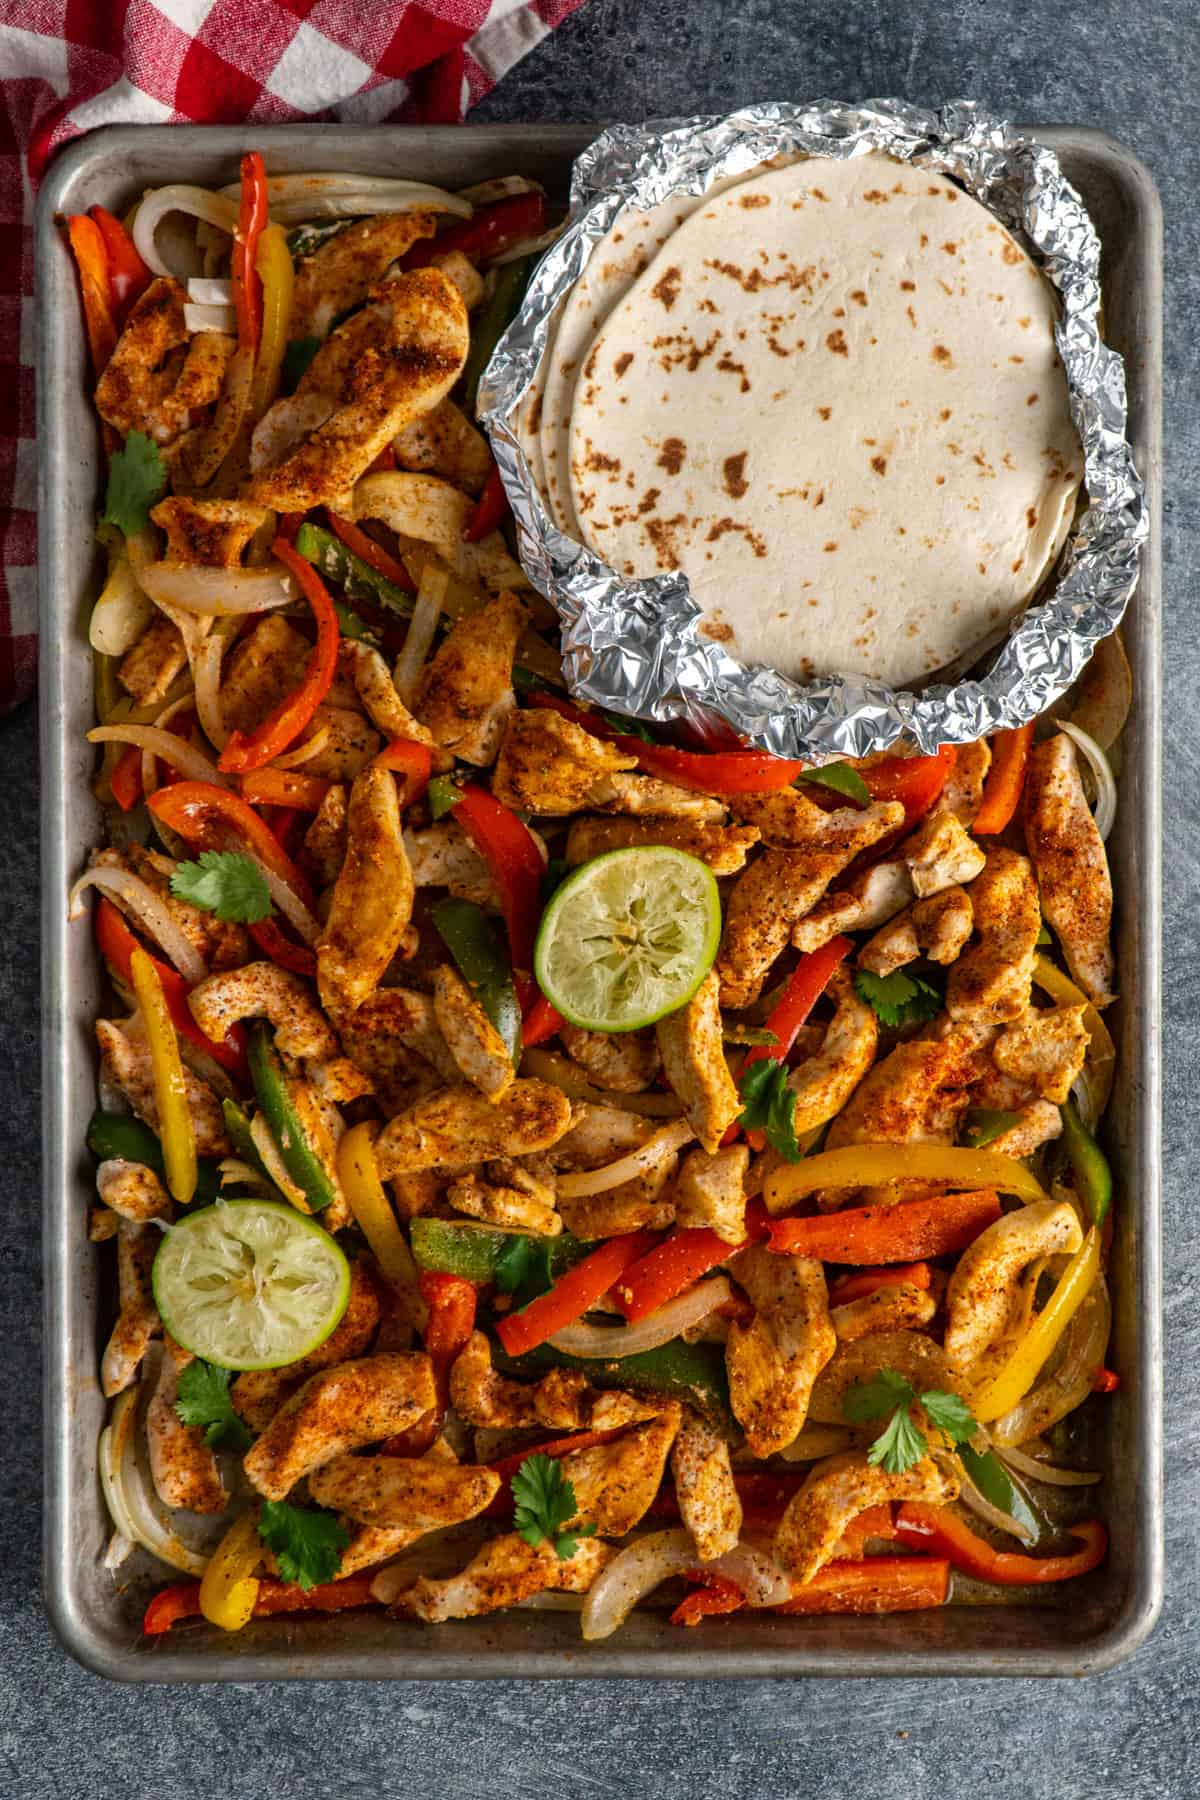 Sheet Pan chicken fajitas with fresh squeezed limes and tortillas.